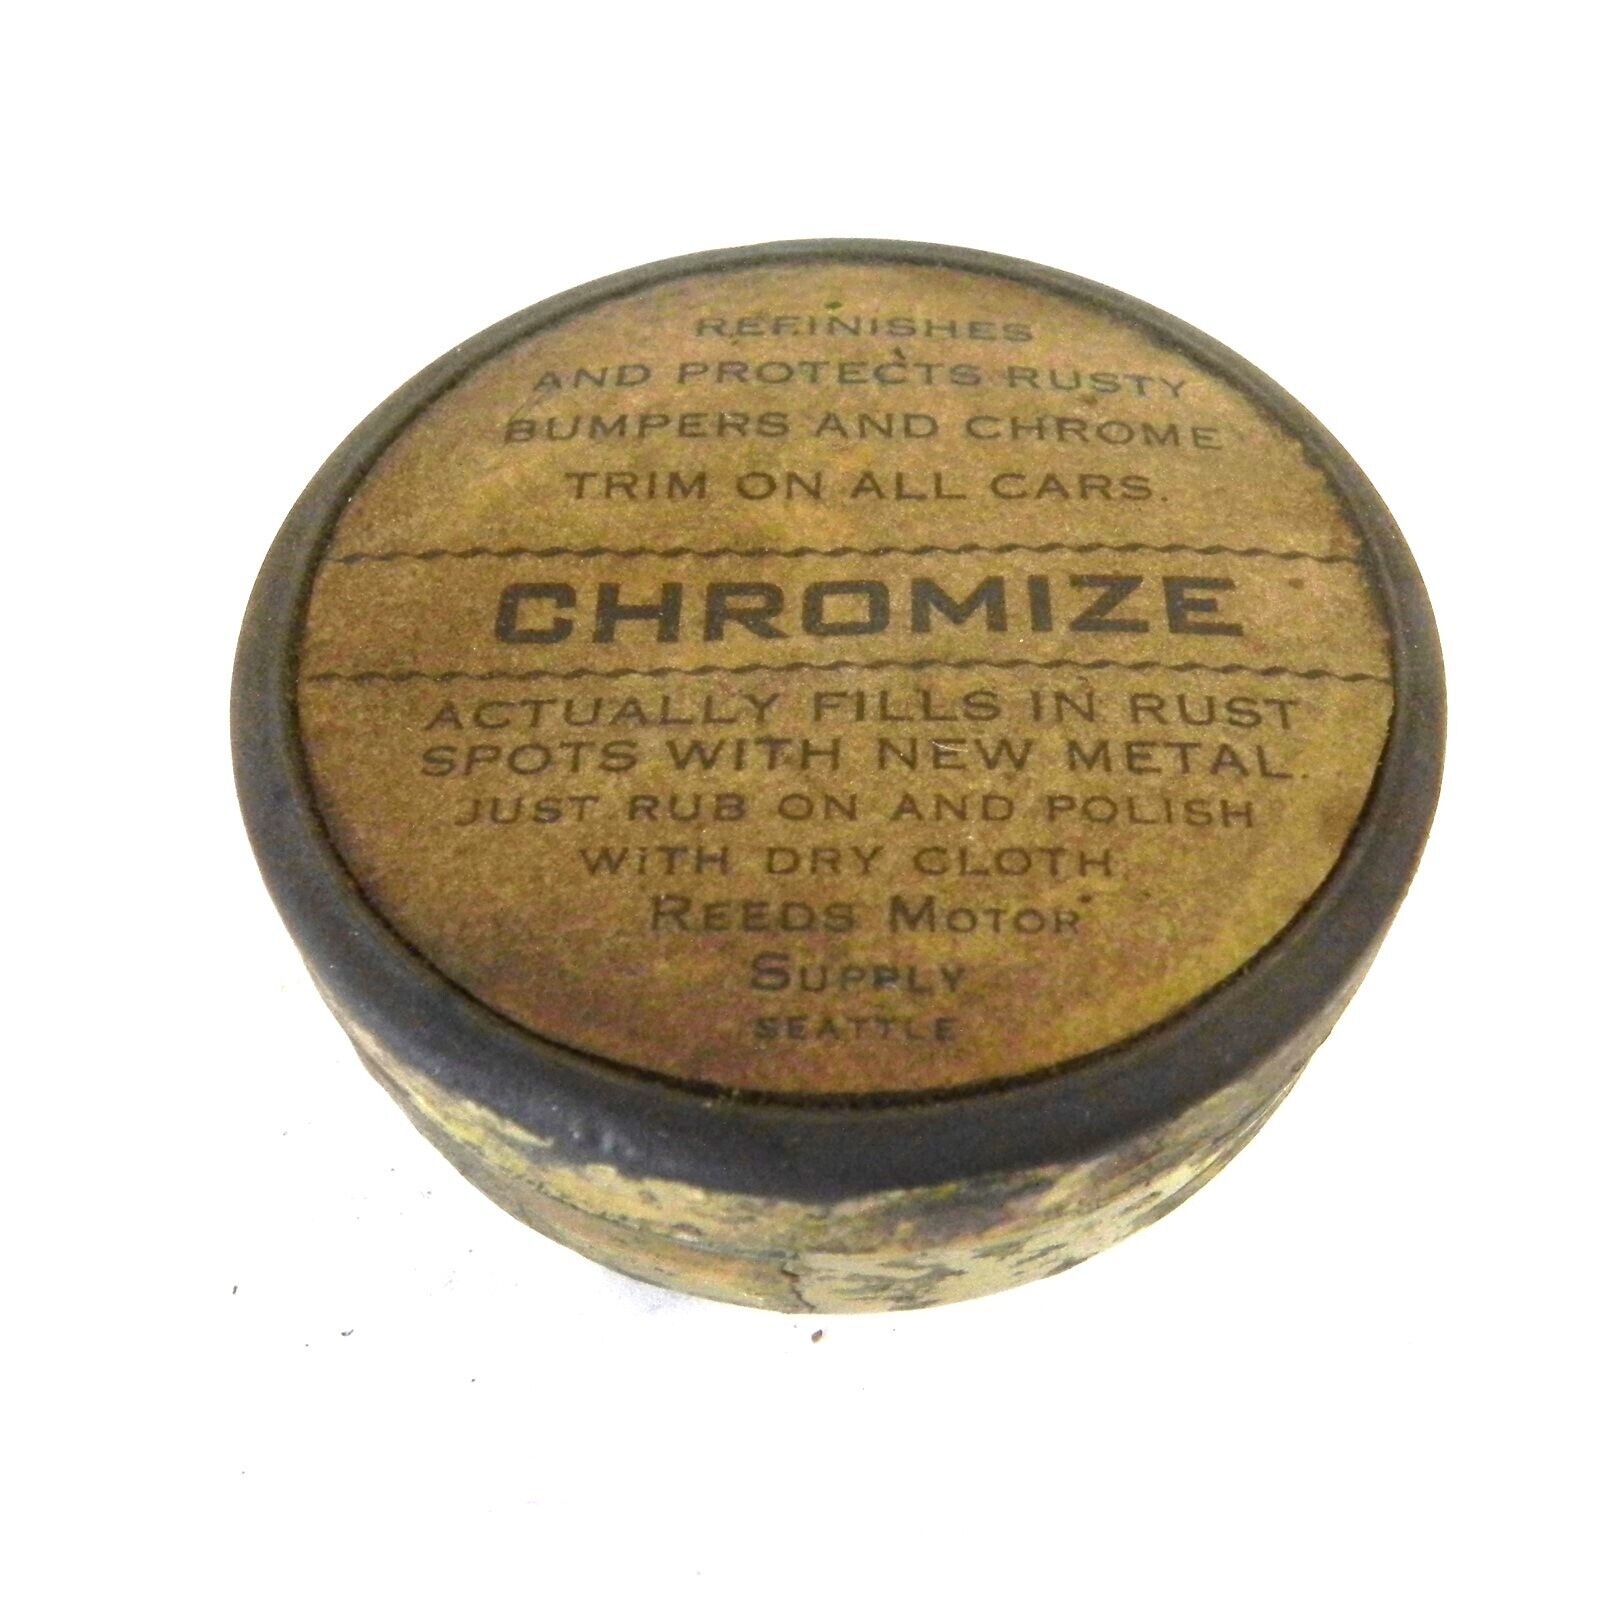 VINTAGE CHOMIZE TIN CAN REED\'S MOTOR SUPPLY SEATTLE CONTENTS SOLIDIFIED USED VTG